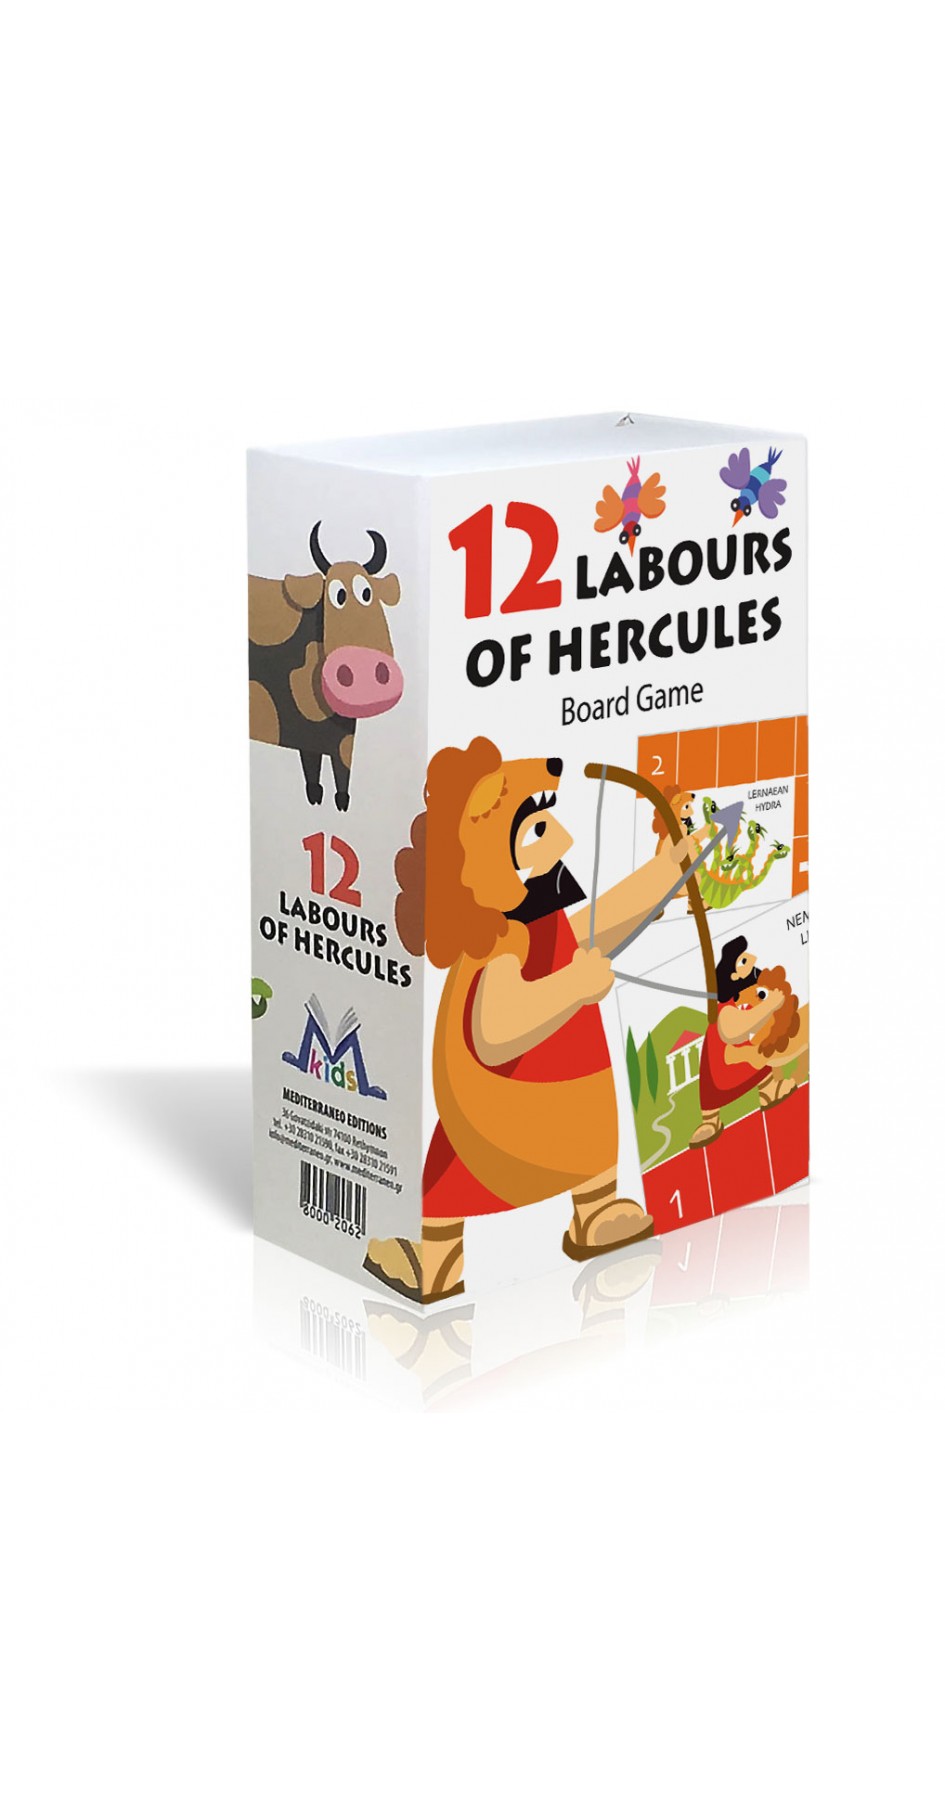 12 labours of hercules game